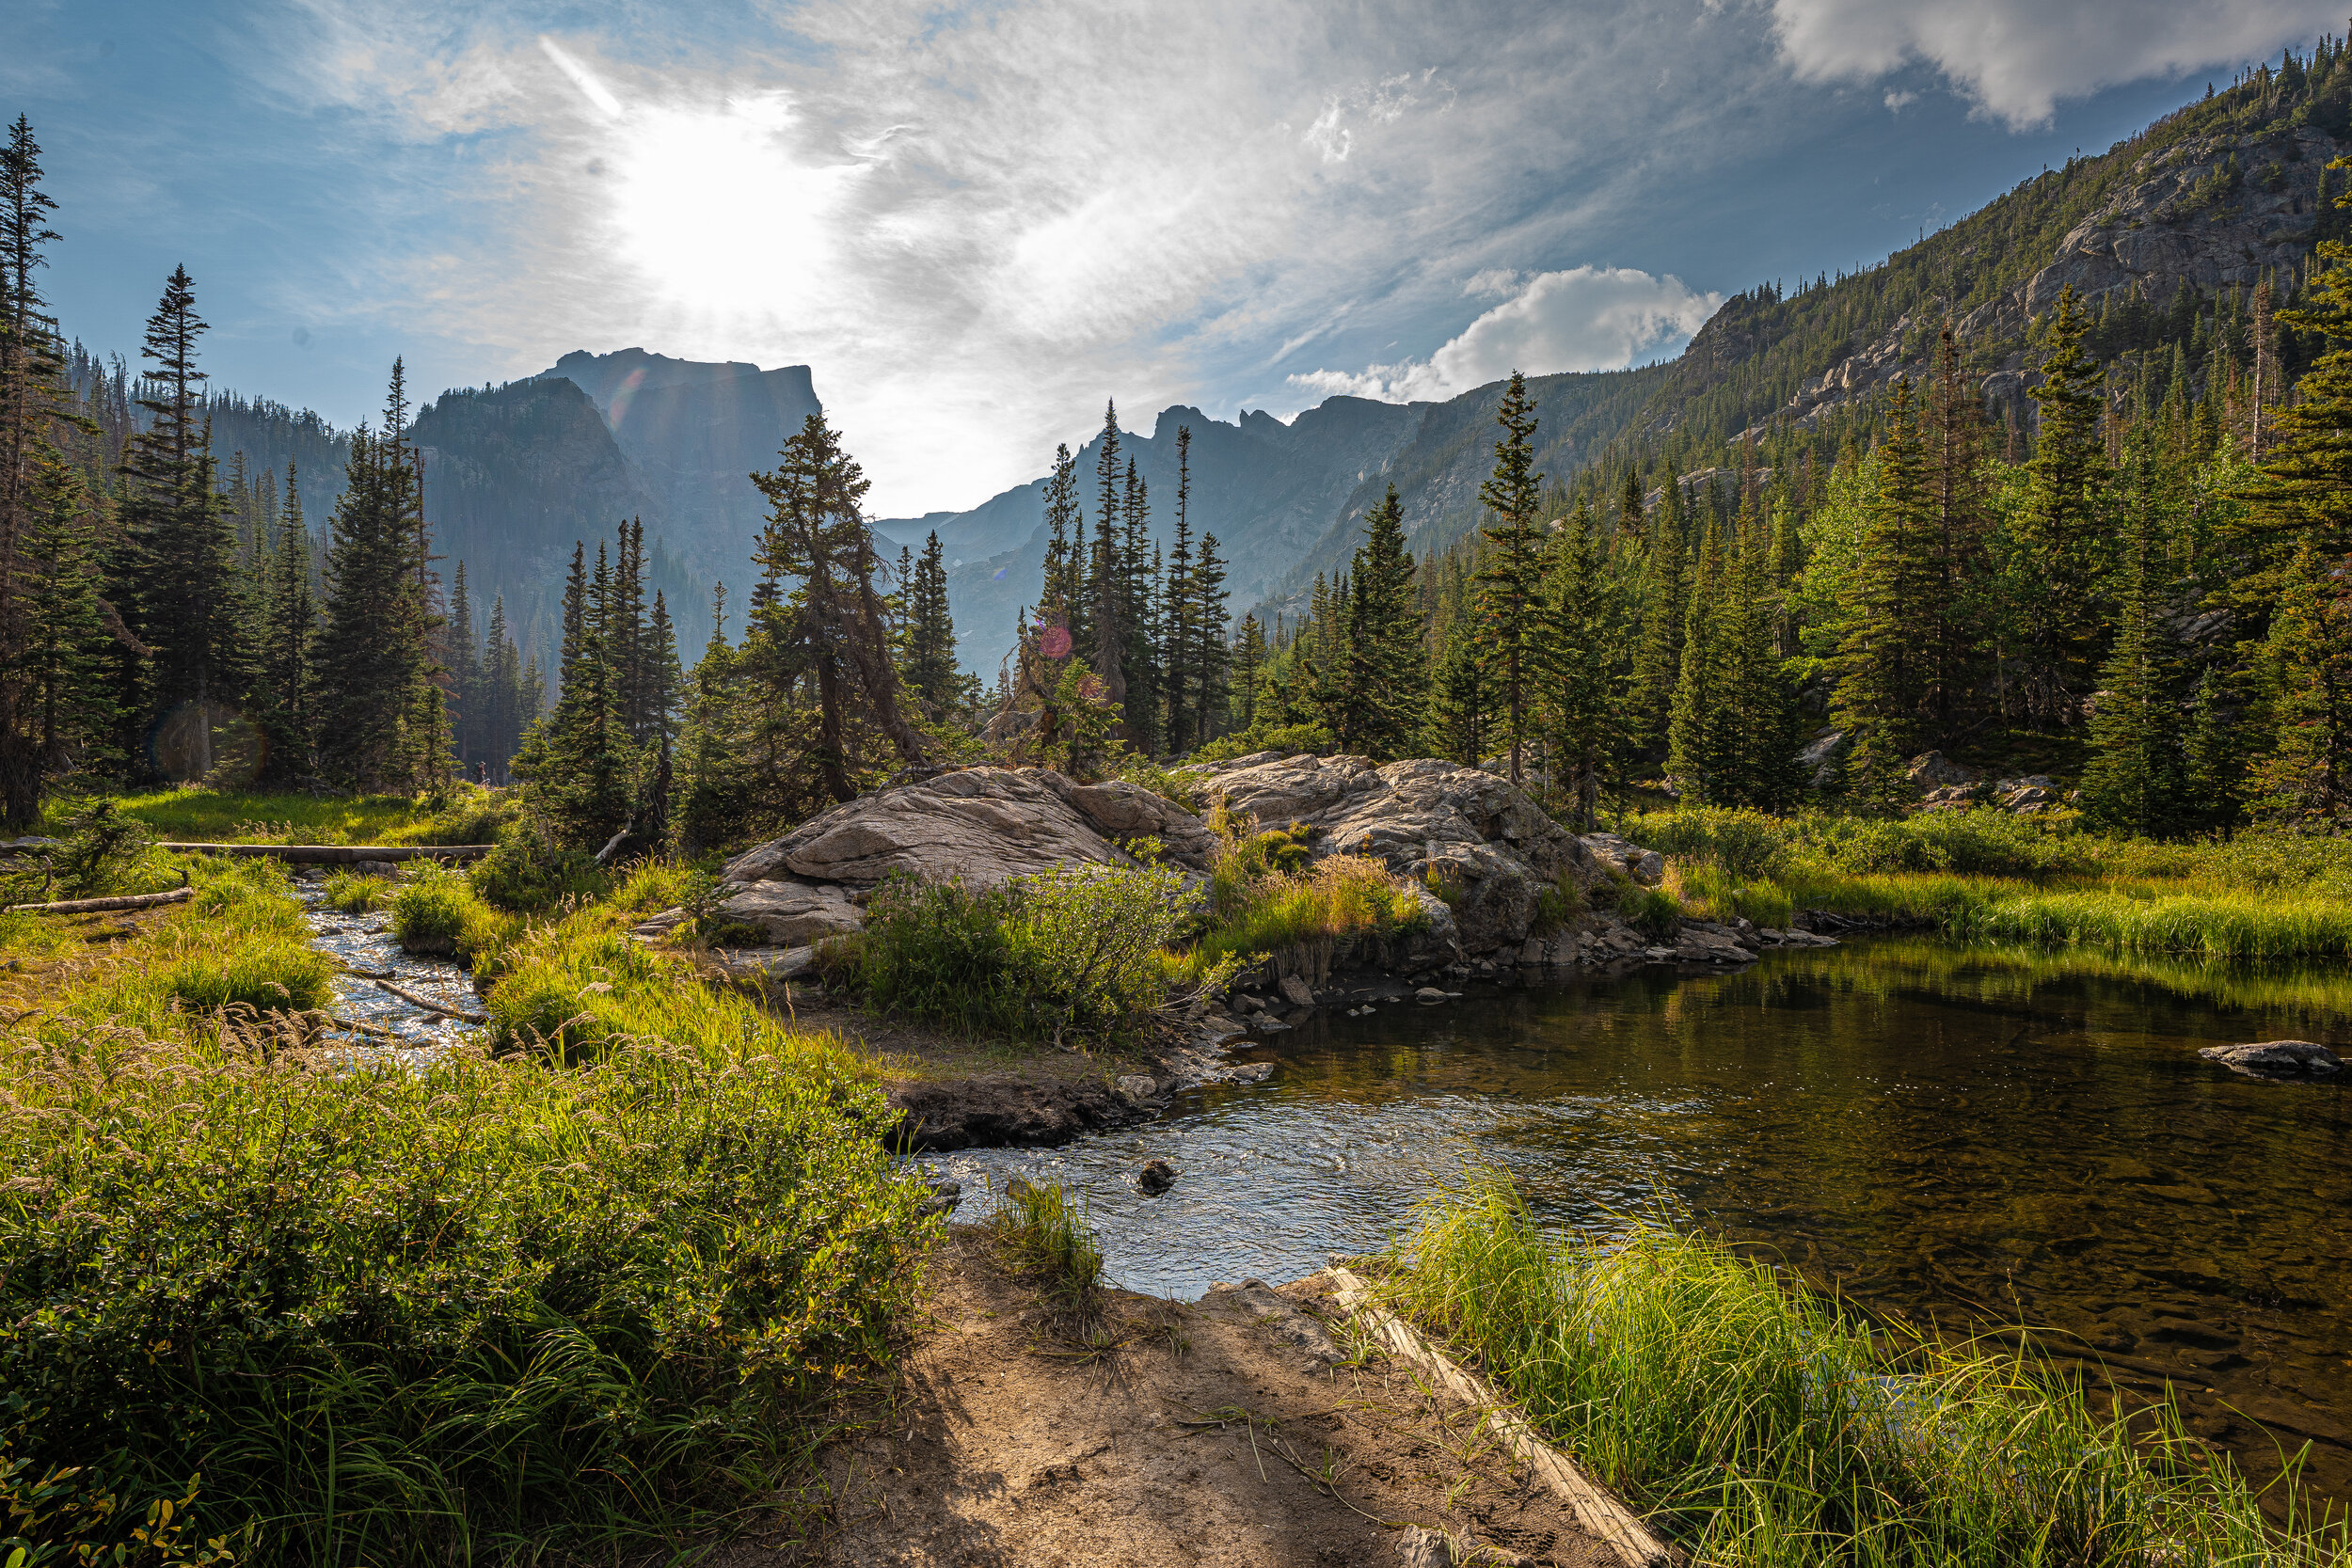  One of the many spectacular views along the  Emerald Lake Trail  in  Rocky Mountain National Park.   